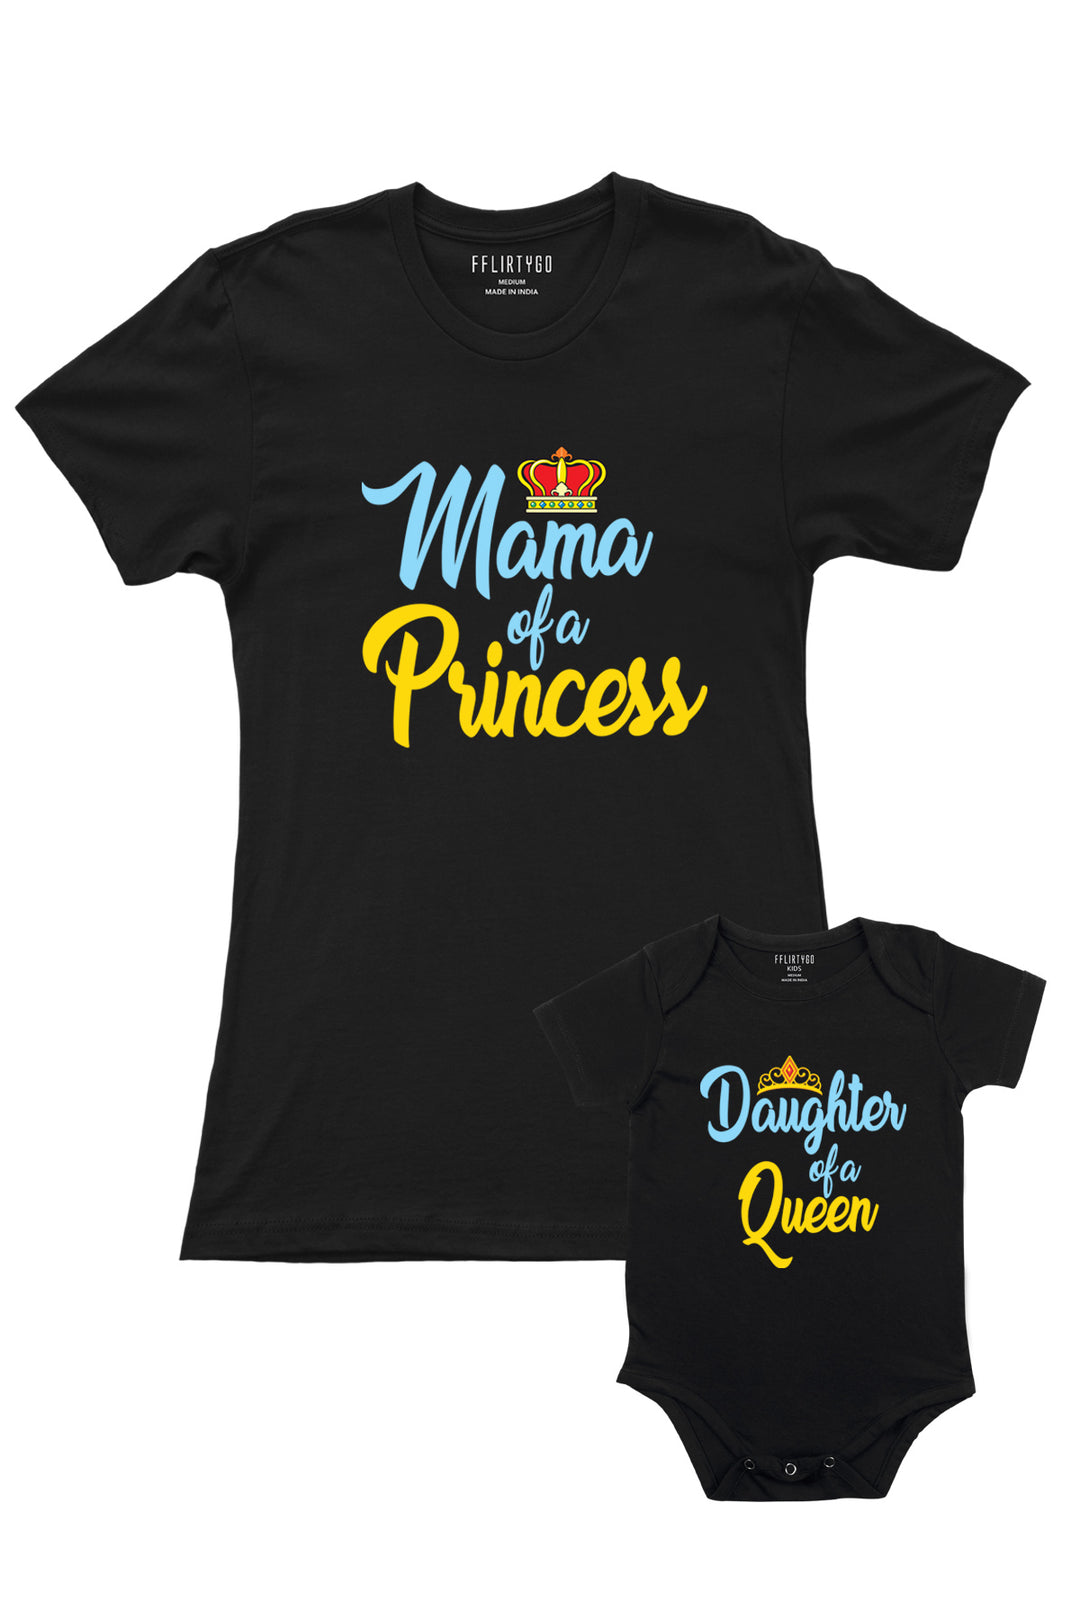 Mama Of A Princess - Daughter of a Queen